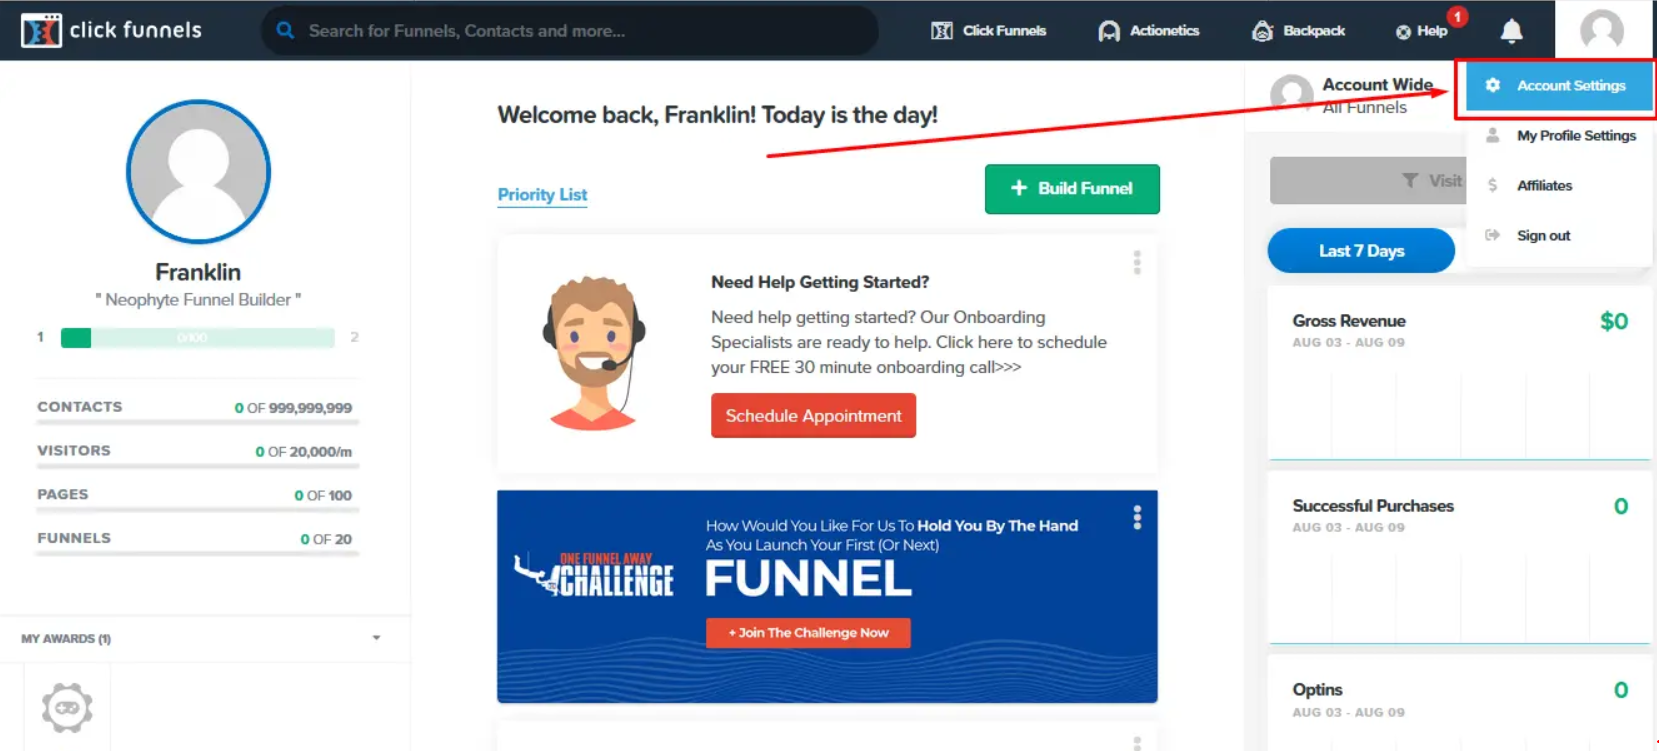 A Biased View of How To Add Optin To Mailchimp With Clickfunnels